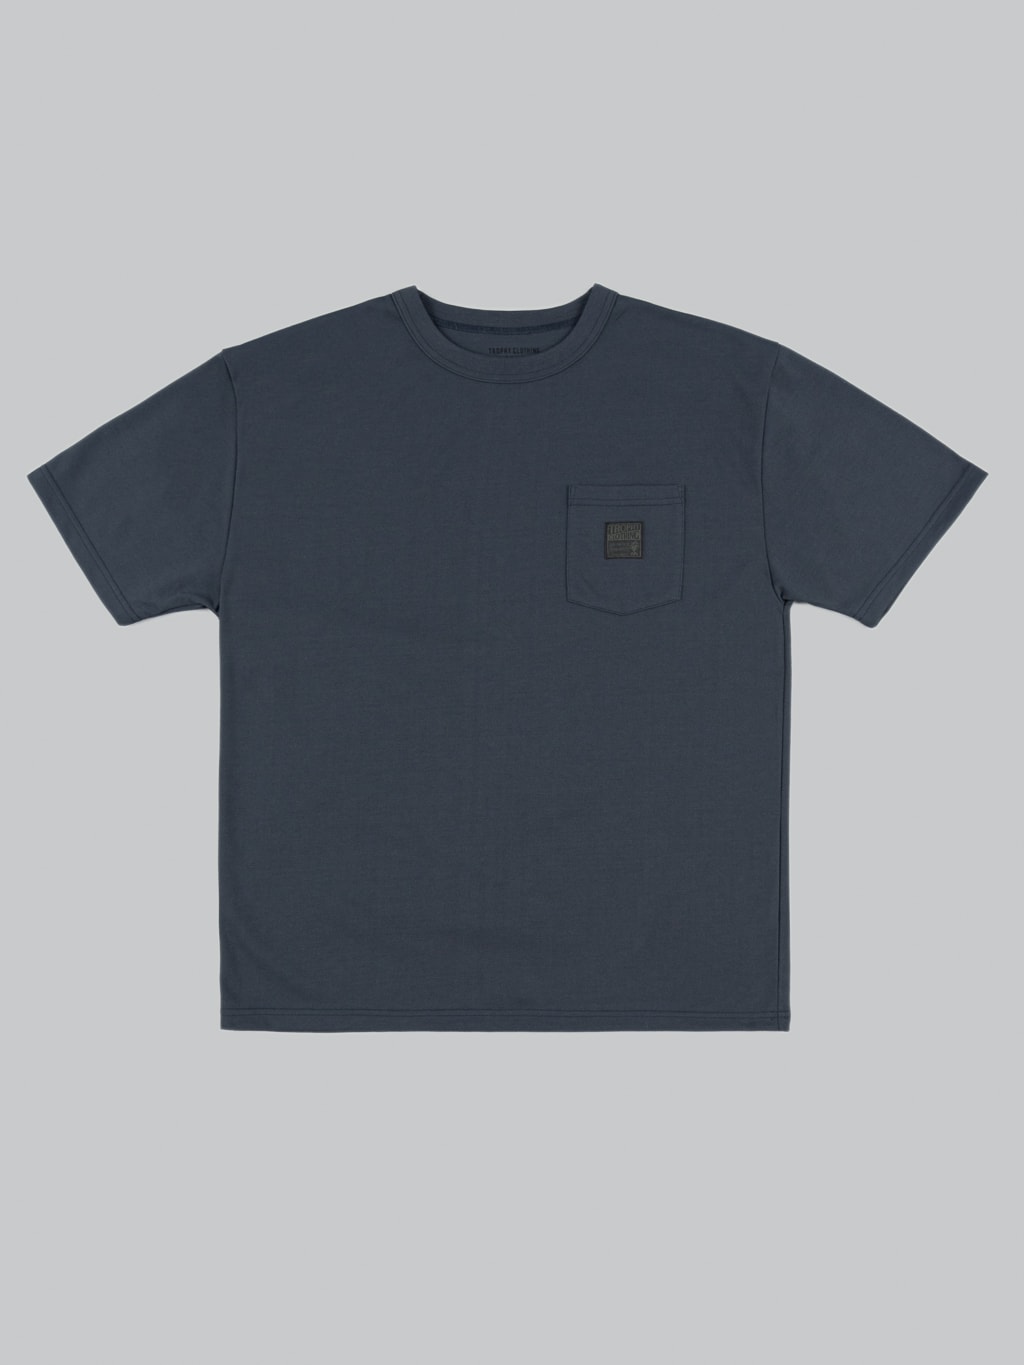 trophy clothing monochrome pc pocket tee charcoal front logo